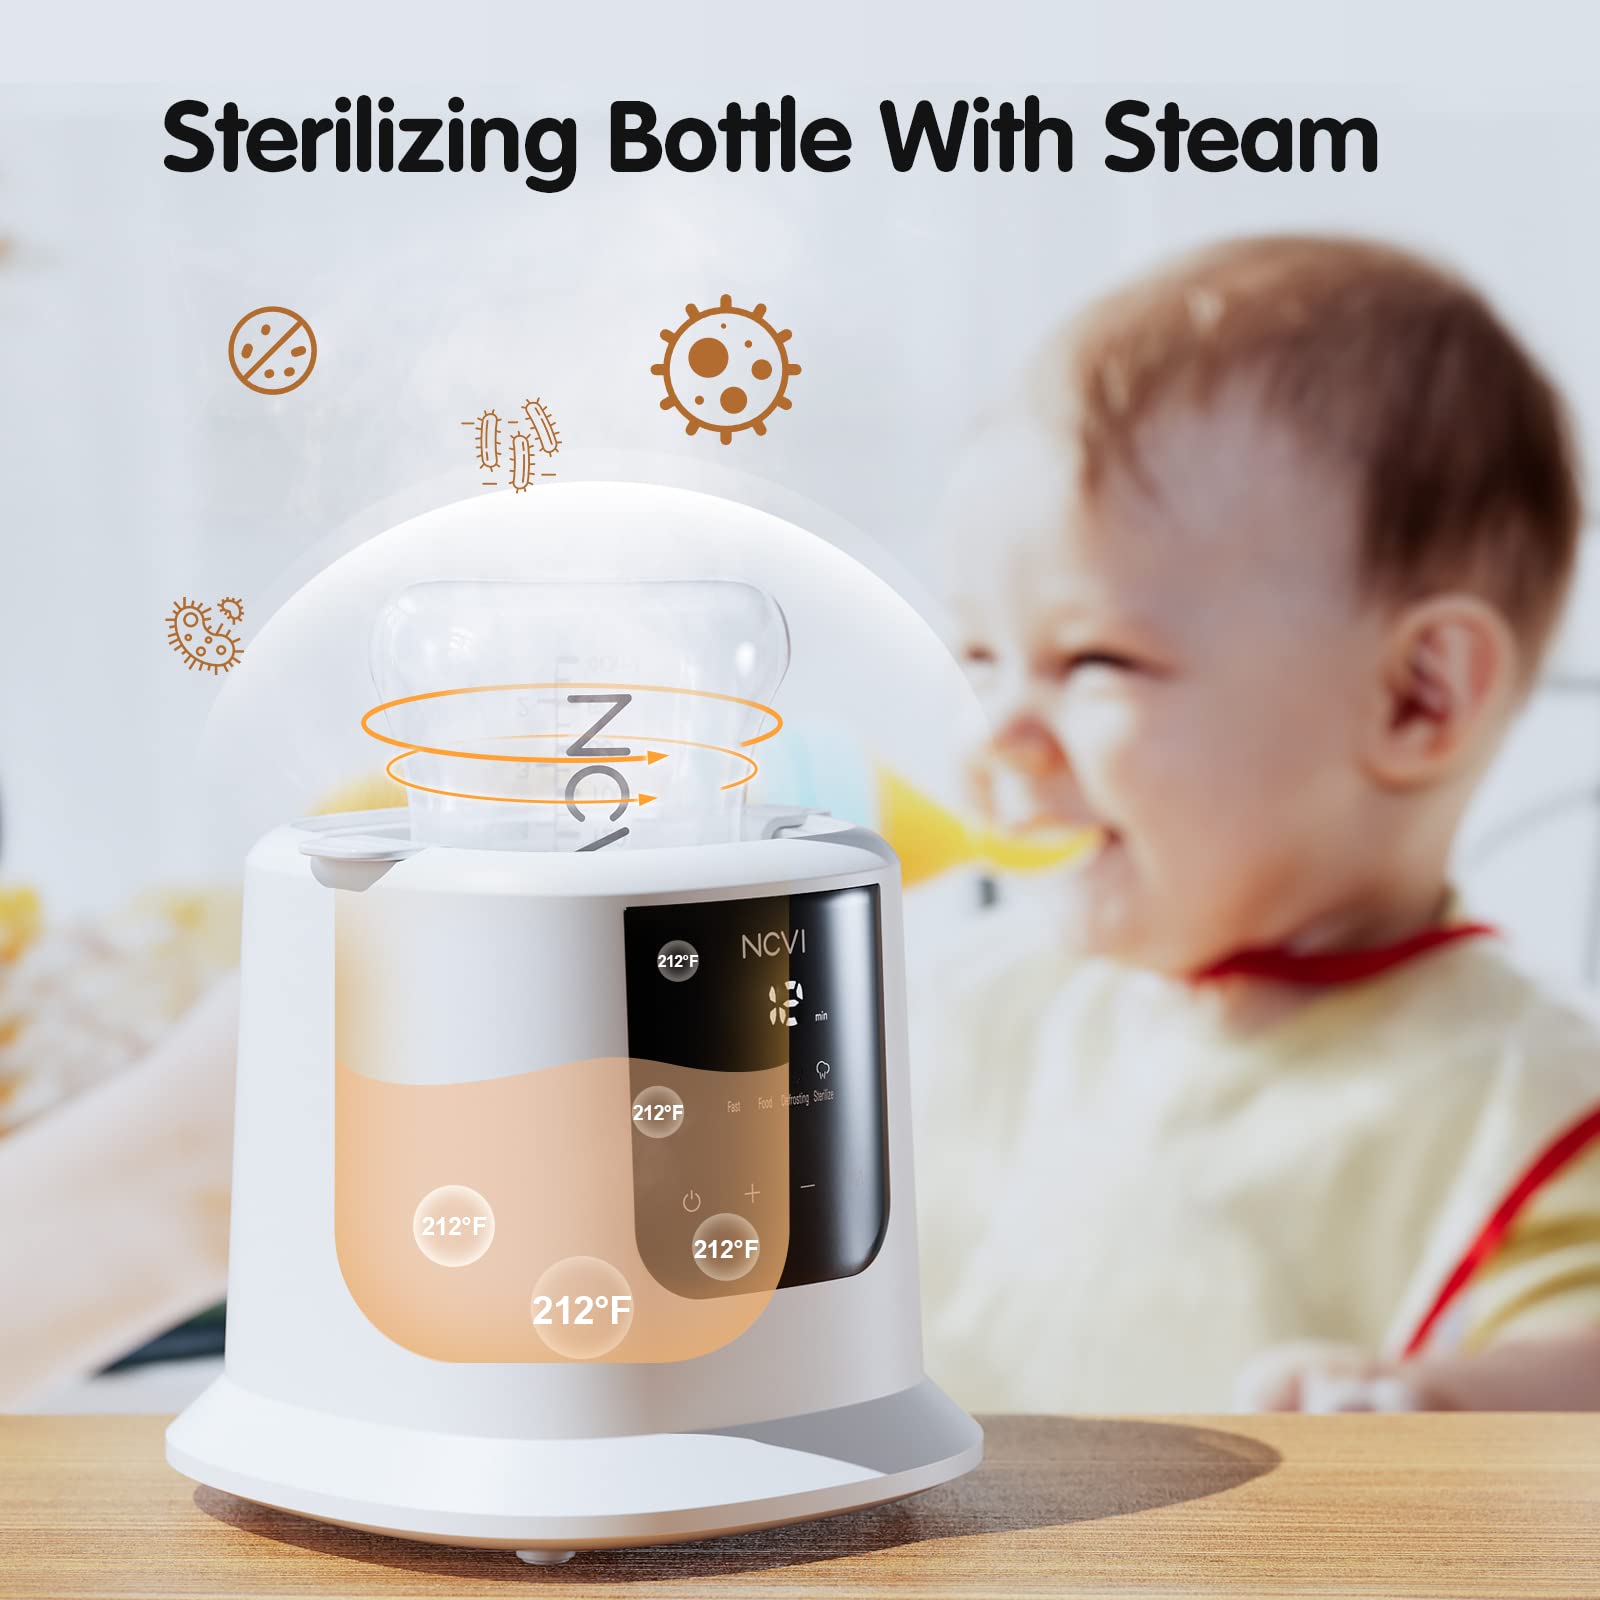 NCVI Baby Bottle Warmer, Milk Warmer Fast Heating, Defrosting Food Heater, Steam Sterilizer, with LCD Display, Timer, Temperature Control, Auto Shut-Off, BPA Free, for Breastmilk, Formula and Food